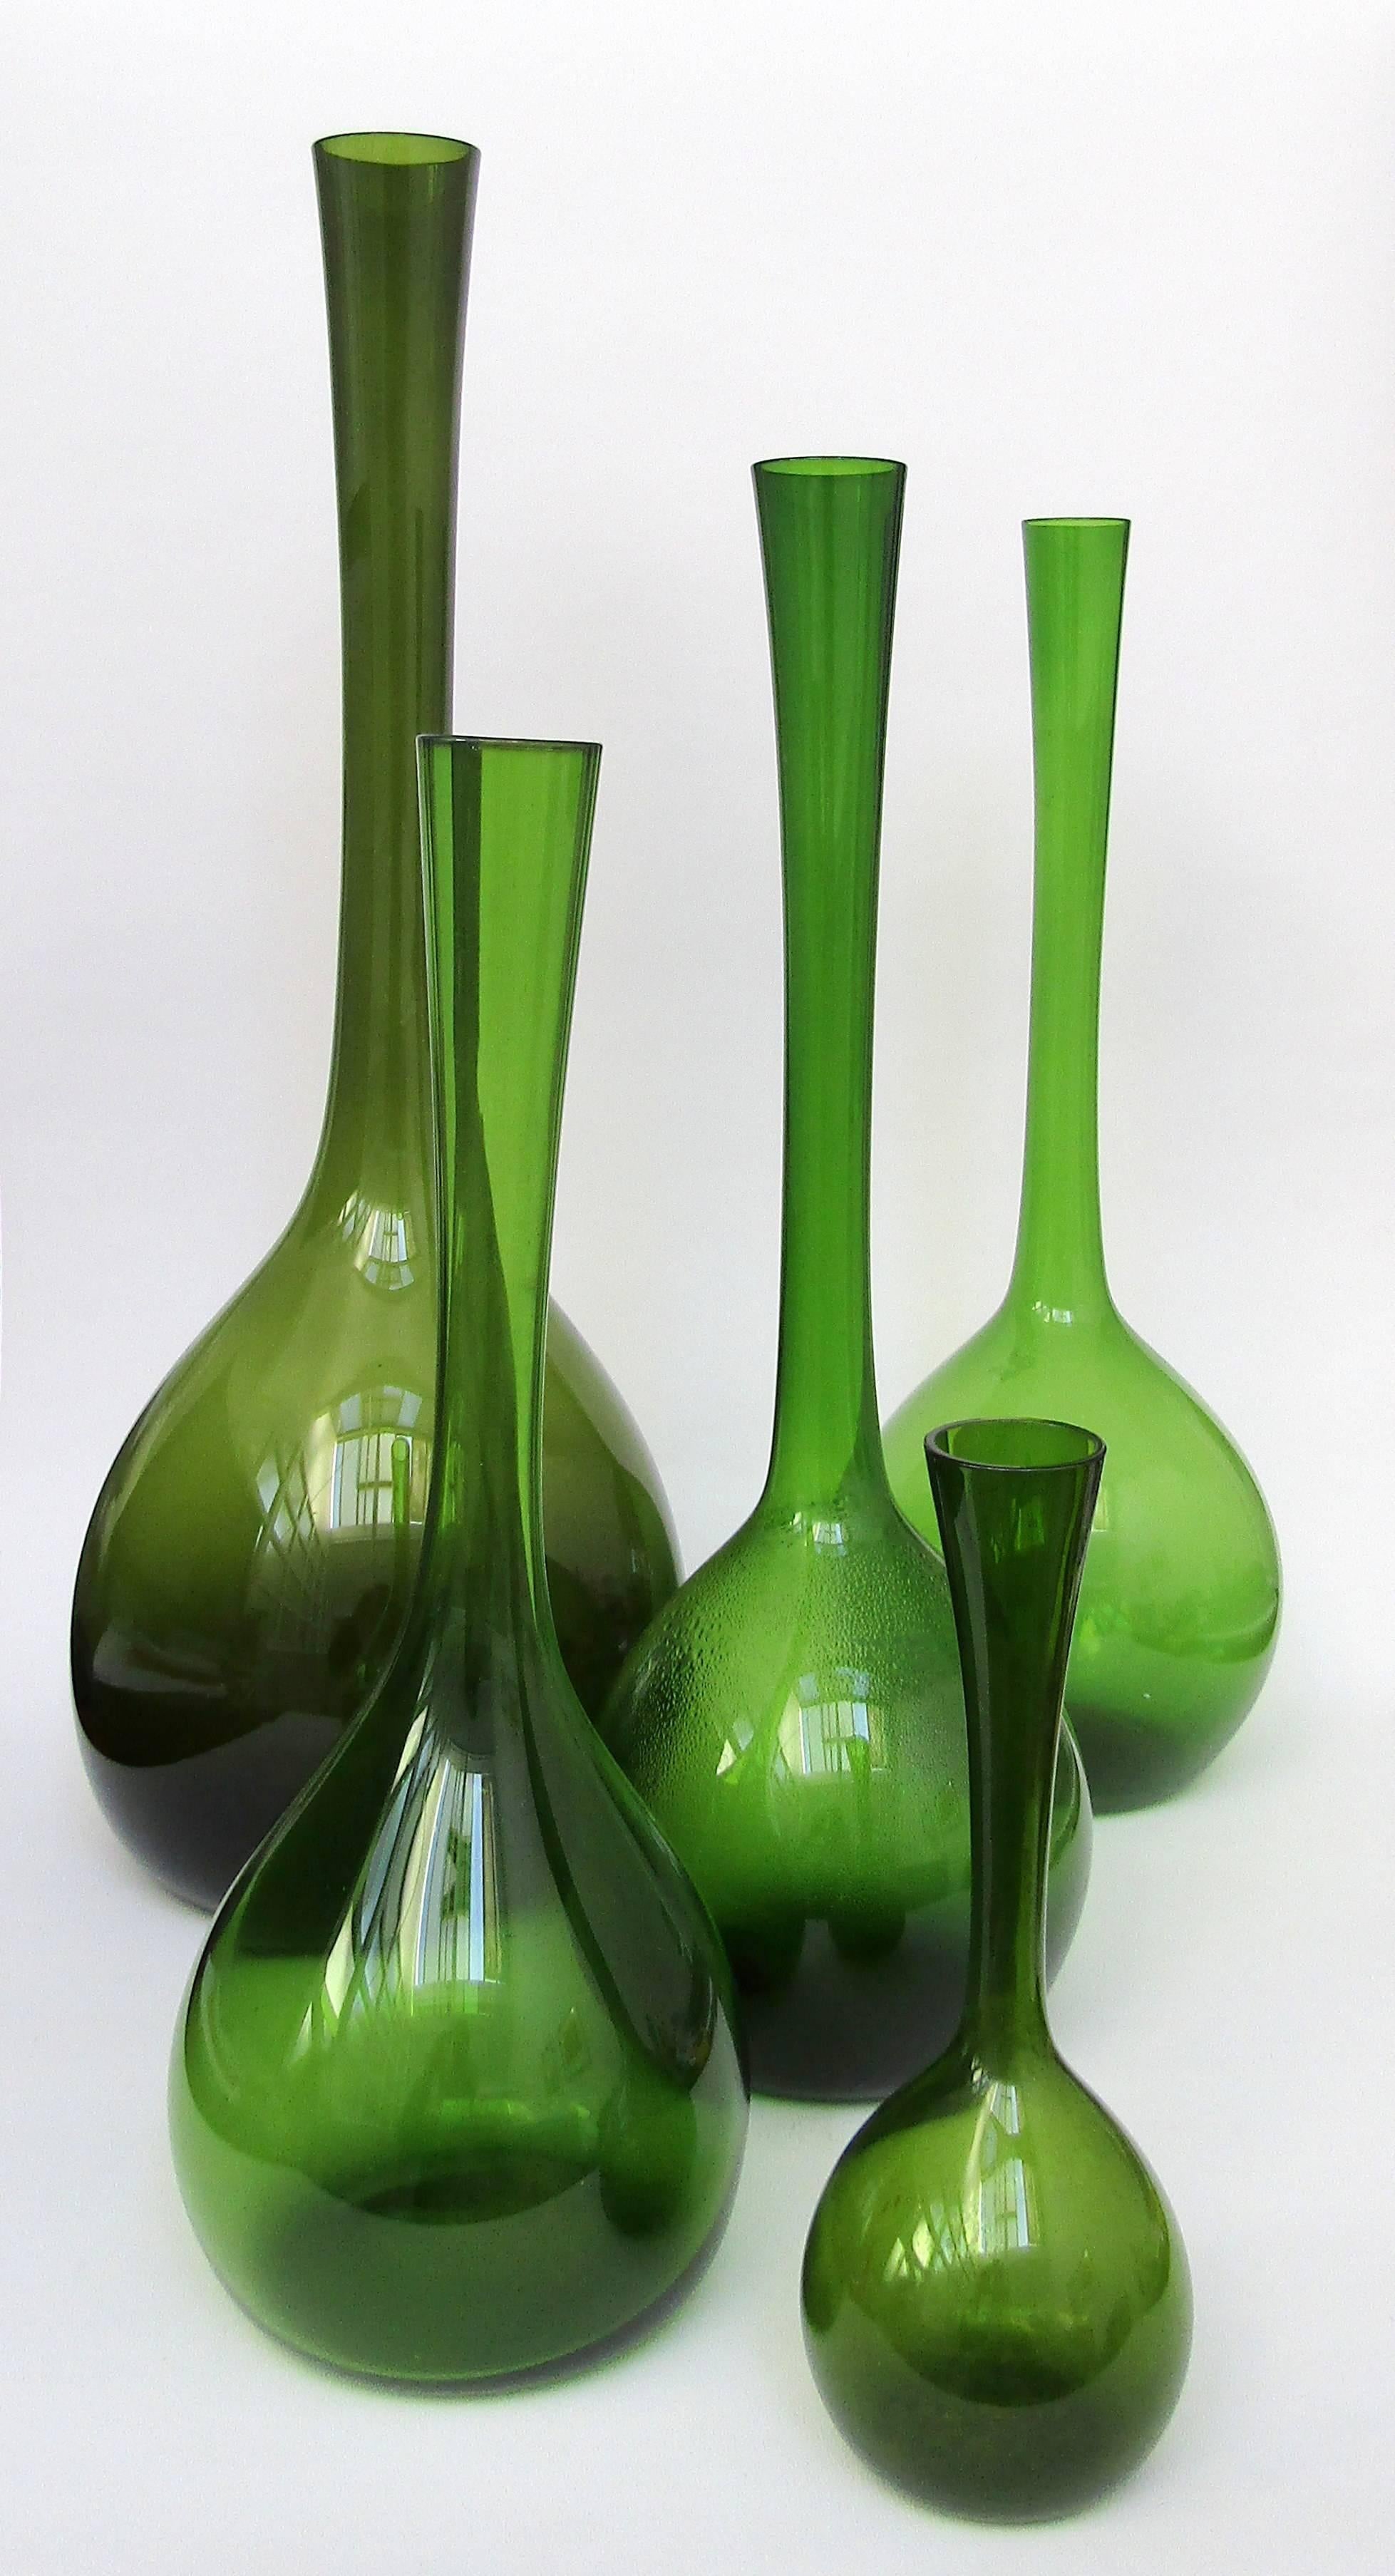 A collection of green blomglas bulb vases,
designed by Arthur Percy for Gullaskruf.

Sold individually:
Height: 8 in / 20 cm SOLD.
Height: 13 ¼ in / 33.5 cm £260.
Height: 15 ¾ in / 40 cm £360.
Height: 19 ¼ in / 49.5 cm £600.
  